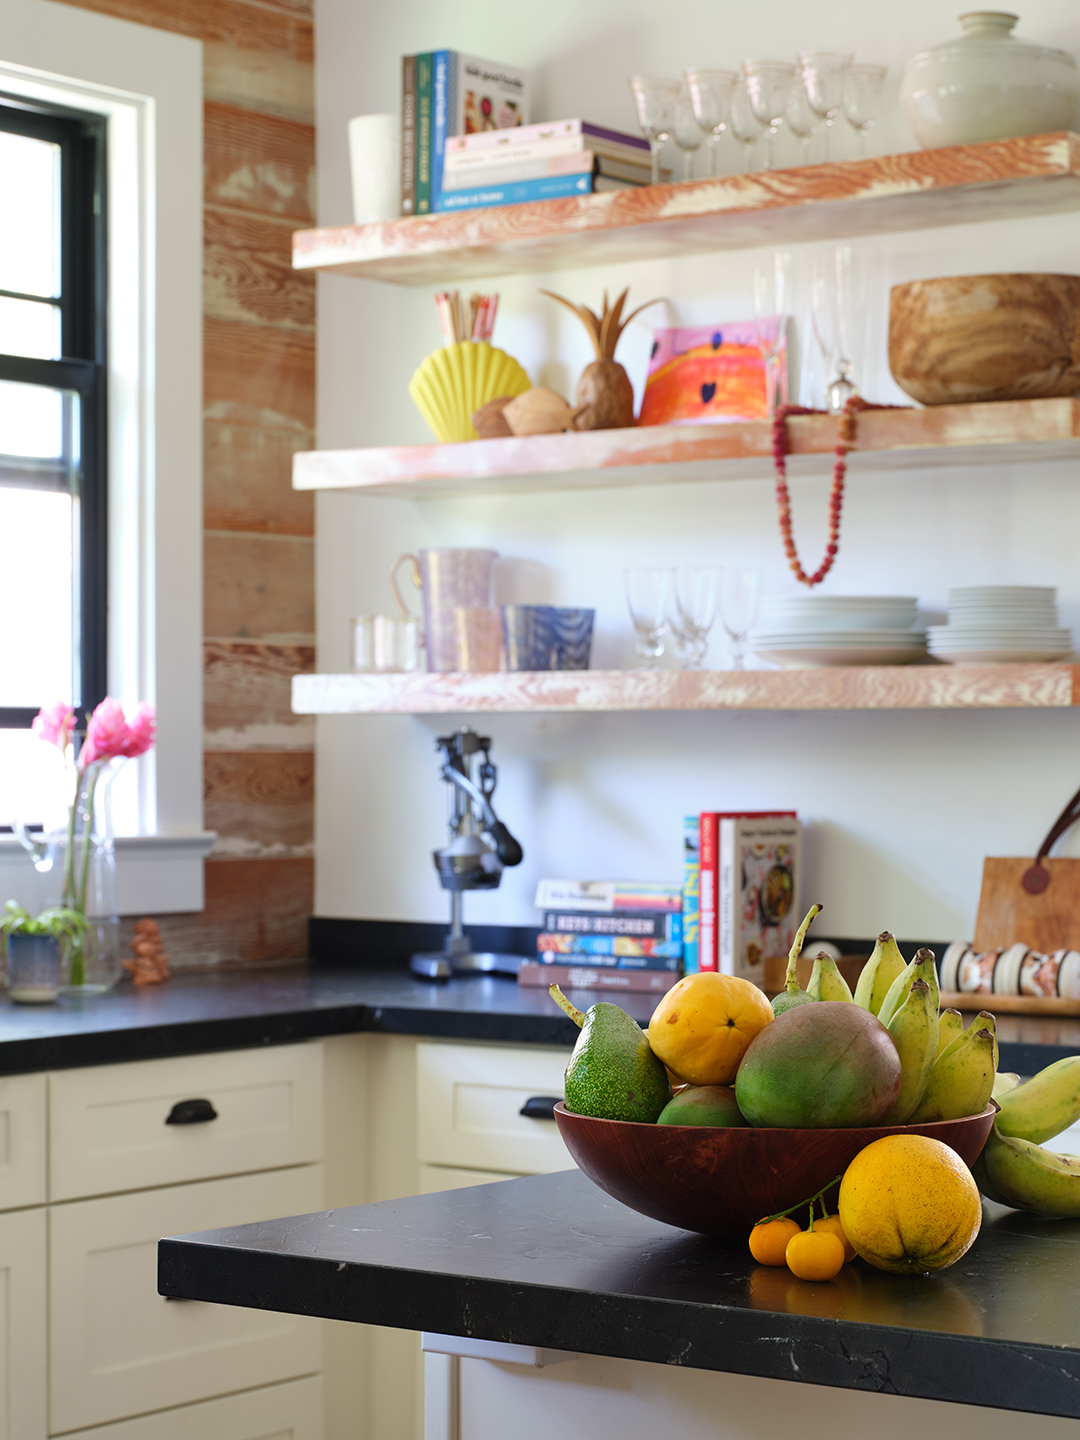 Open shelving in kitchen with bowls and vases